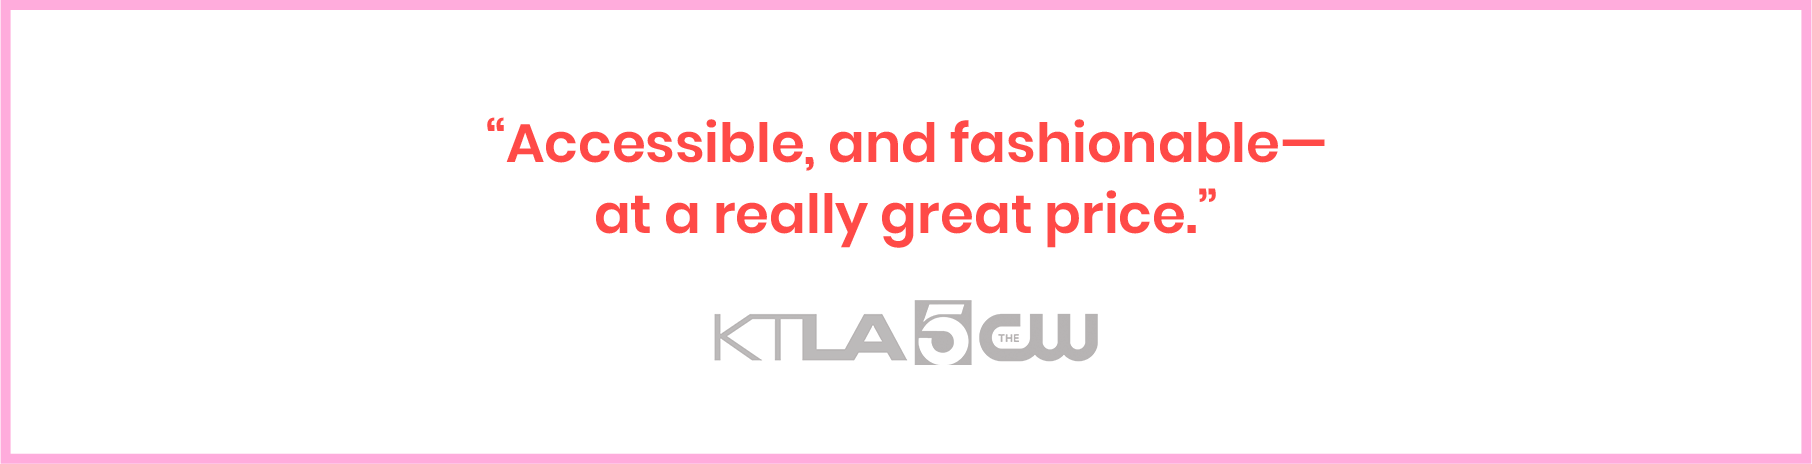 Accessible and fashionable — at a really great price. - KTLA 5 News